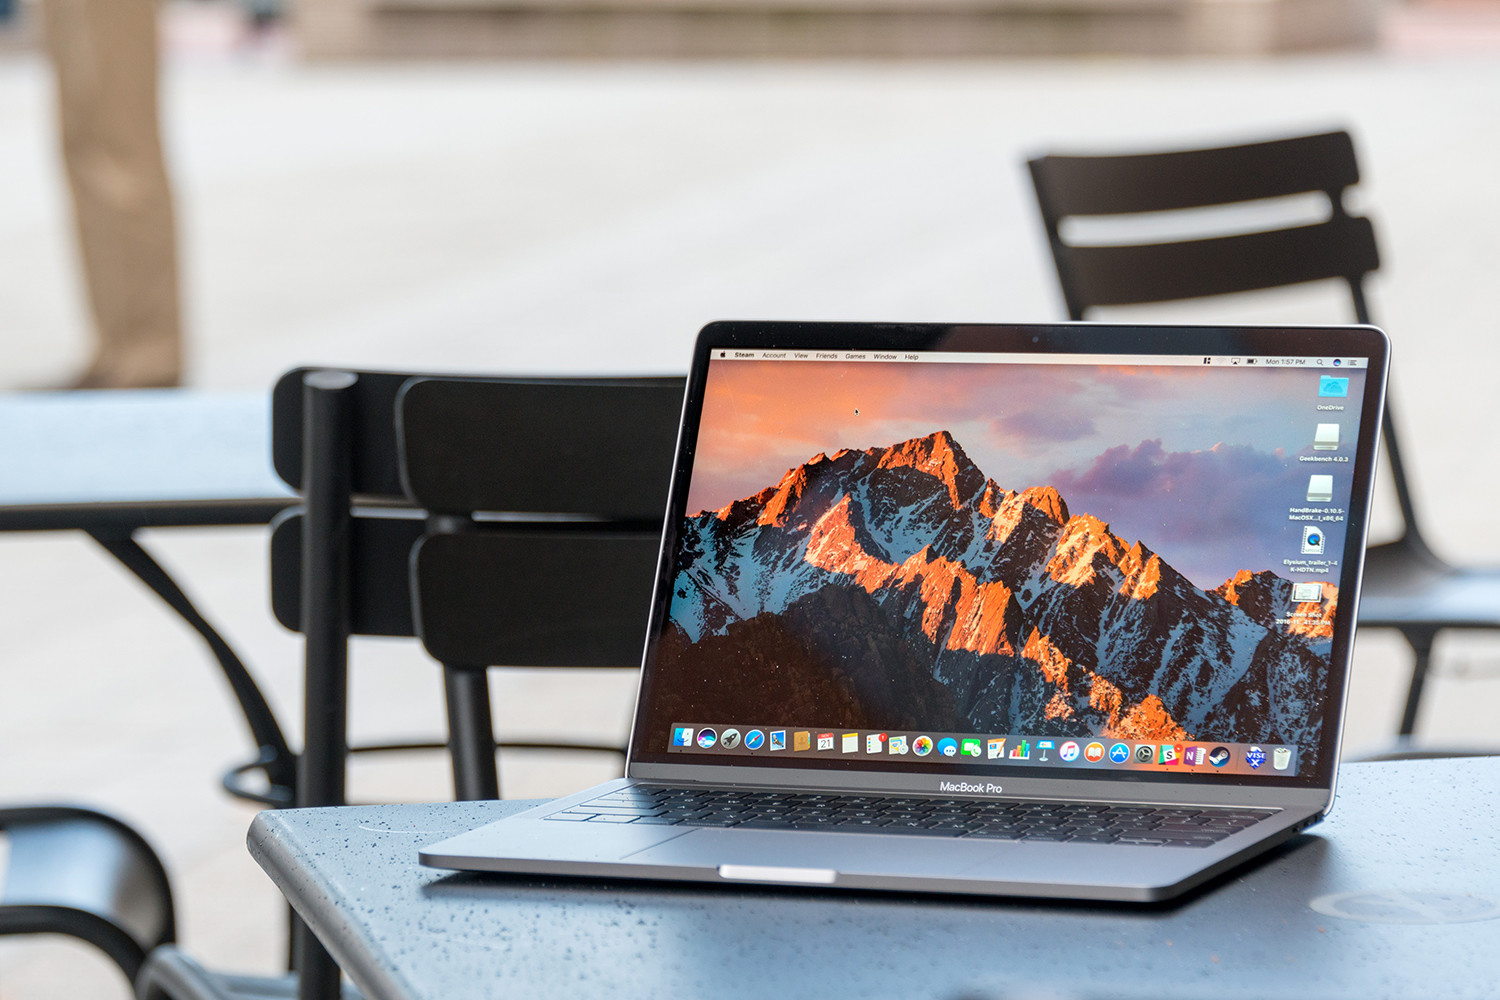 A MacBook Pro sitting on a desk with chairs behind it. The macOS Sierra operating system is on its screen.